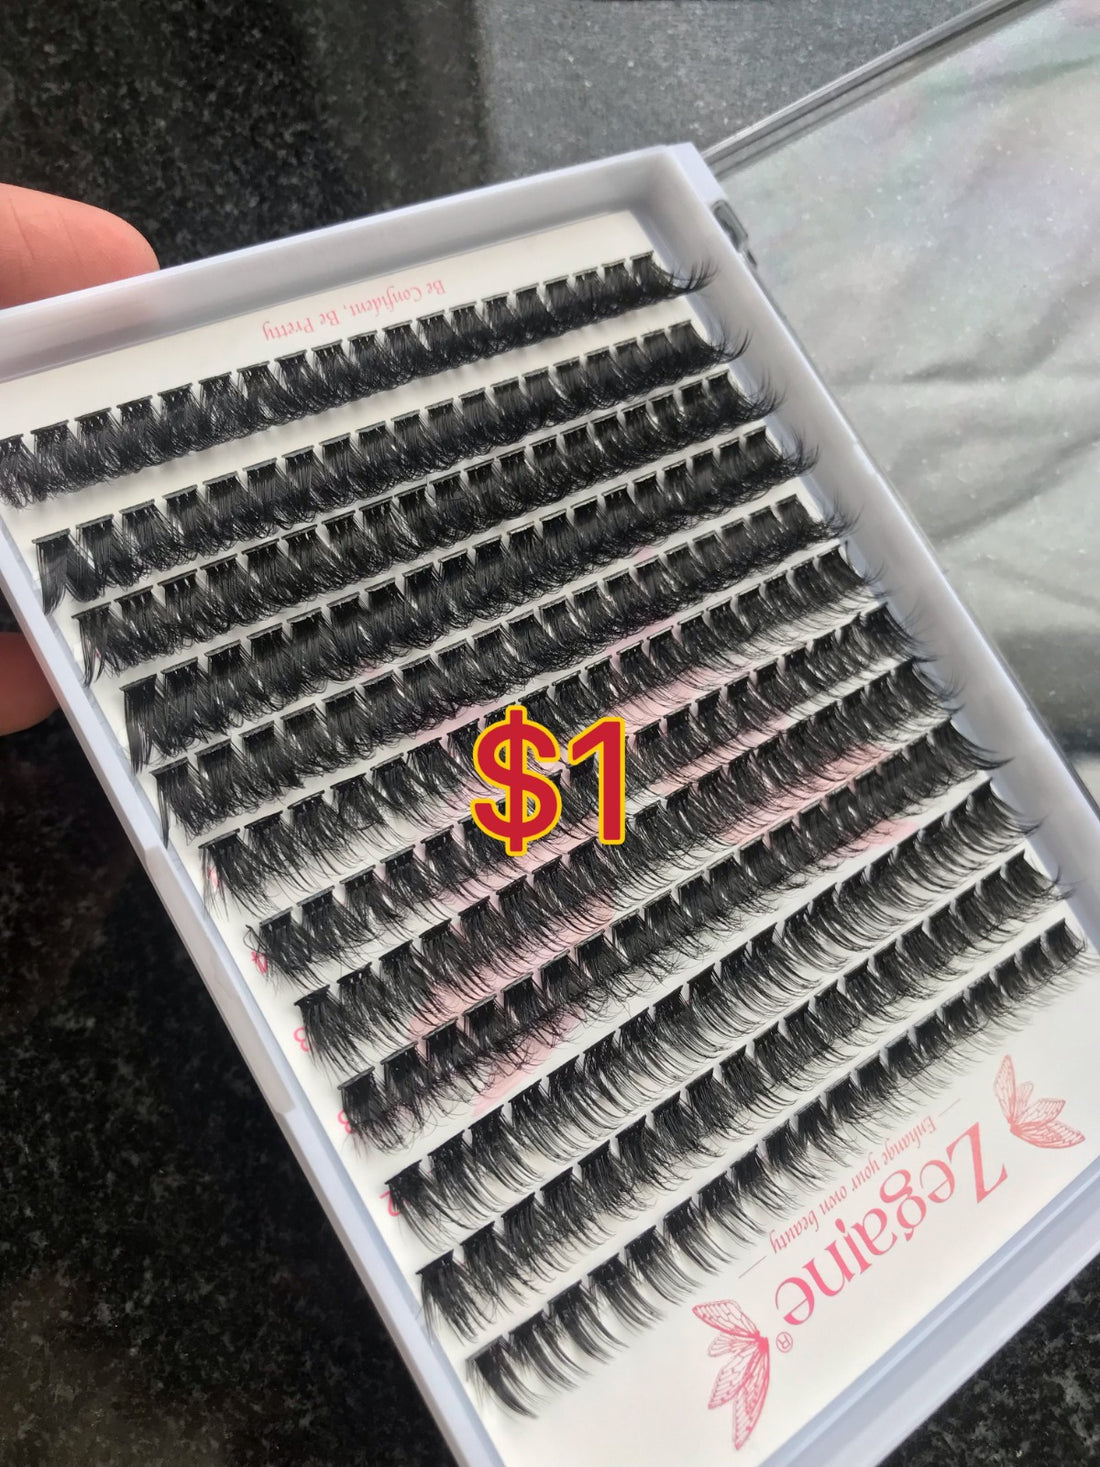 $36.70 for 15 trays lashes